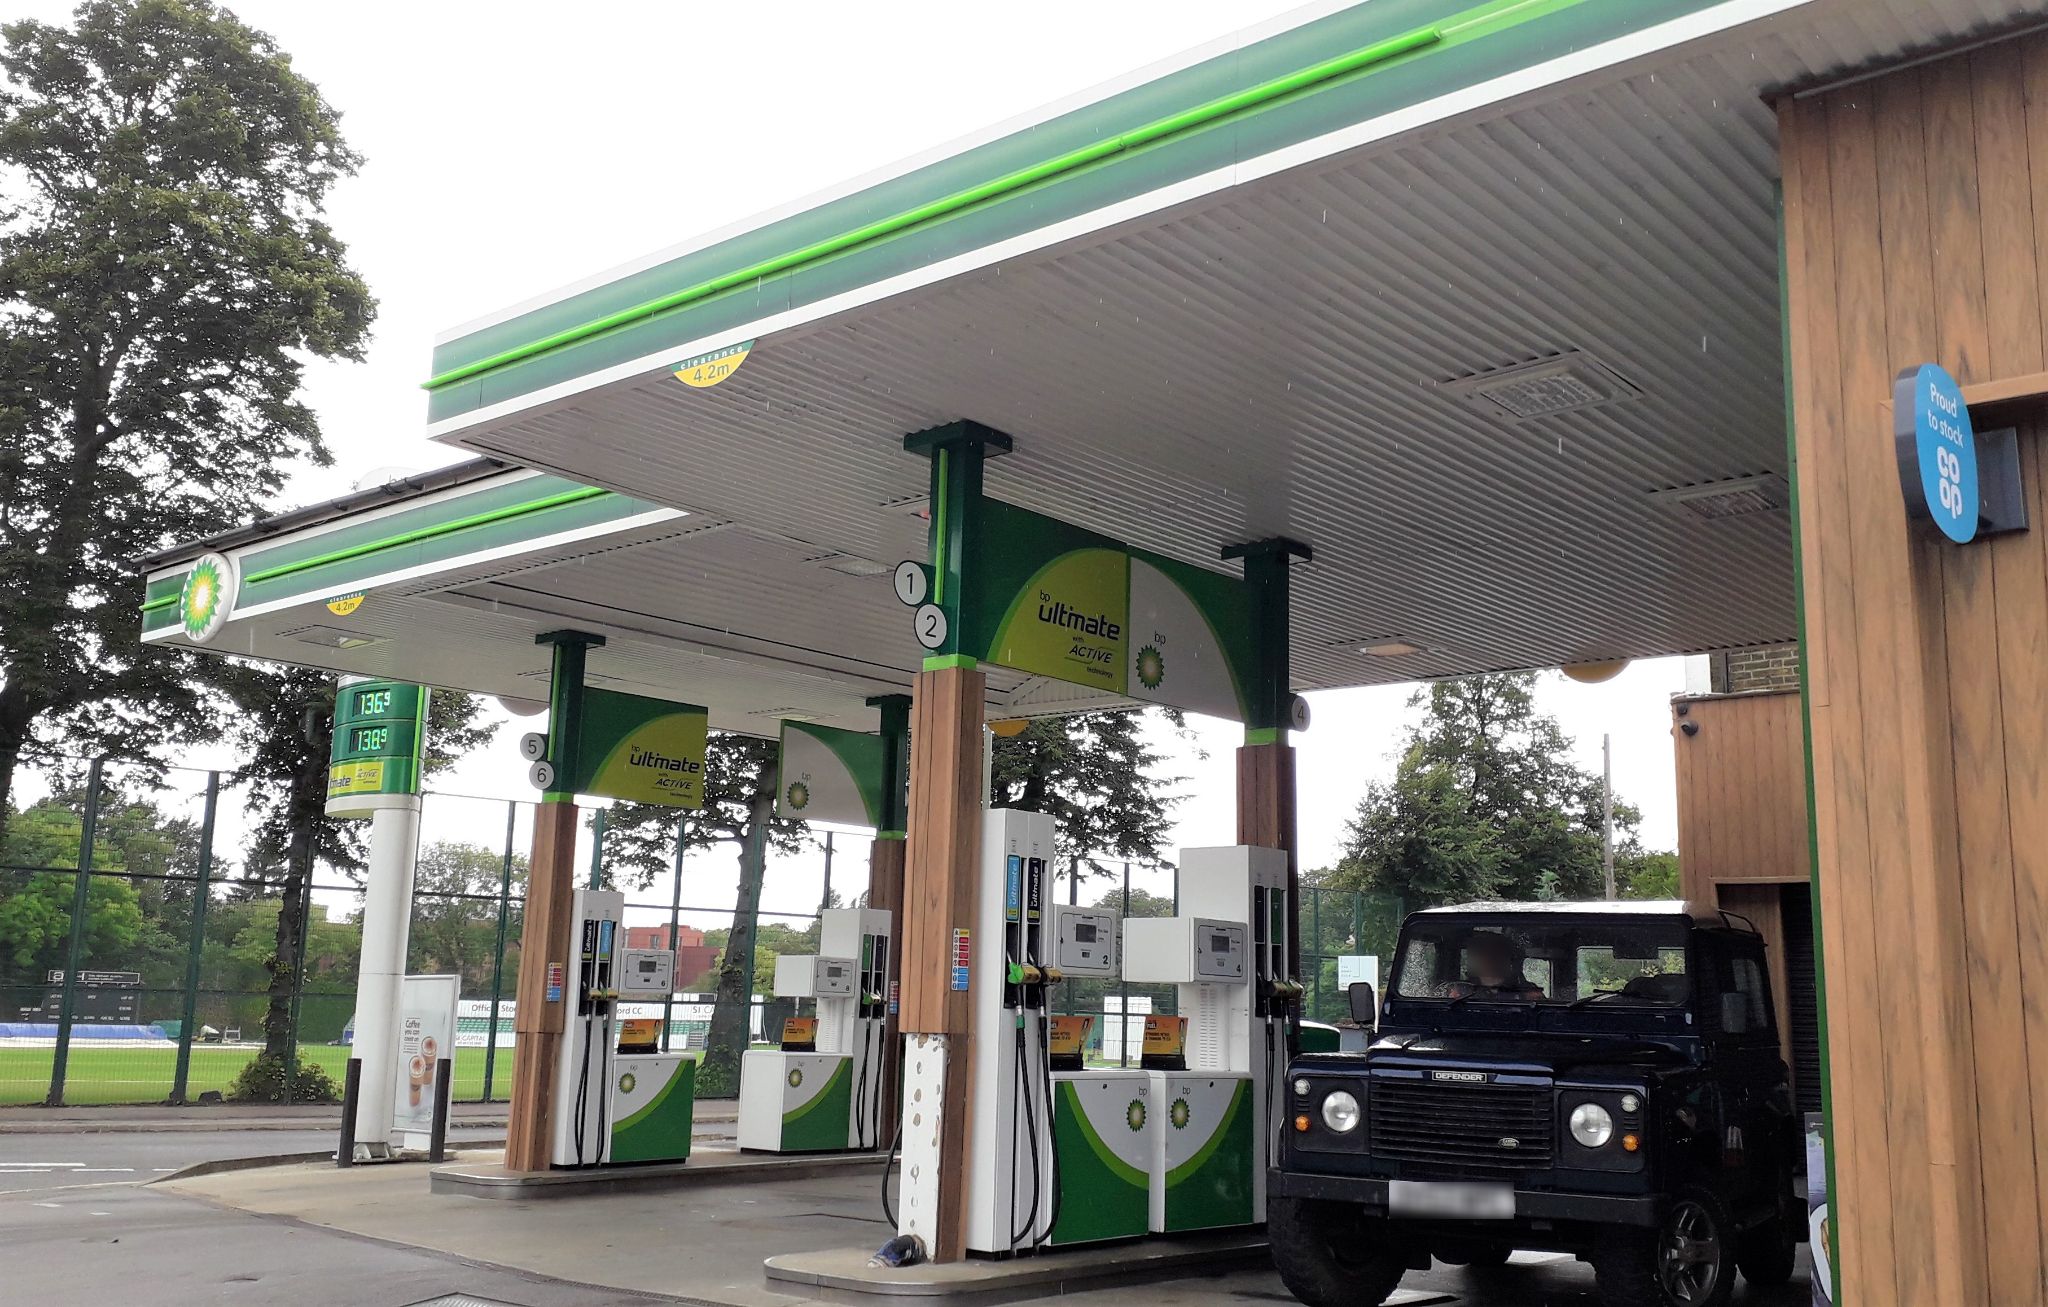 Guildford forecourt to reopen with new look under new owners